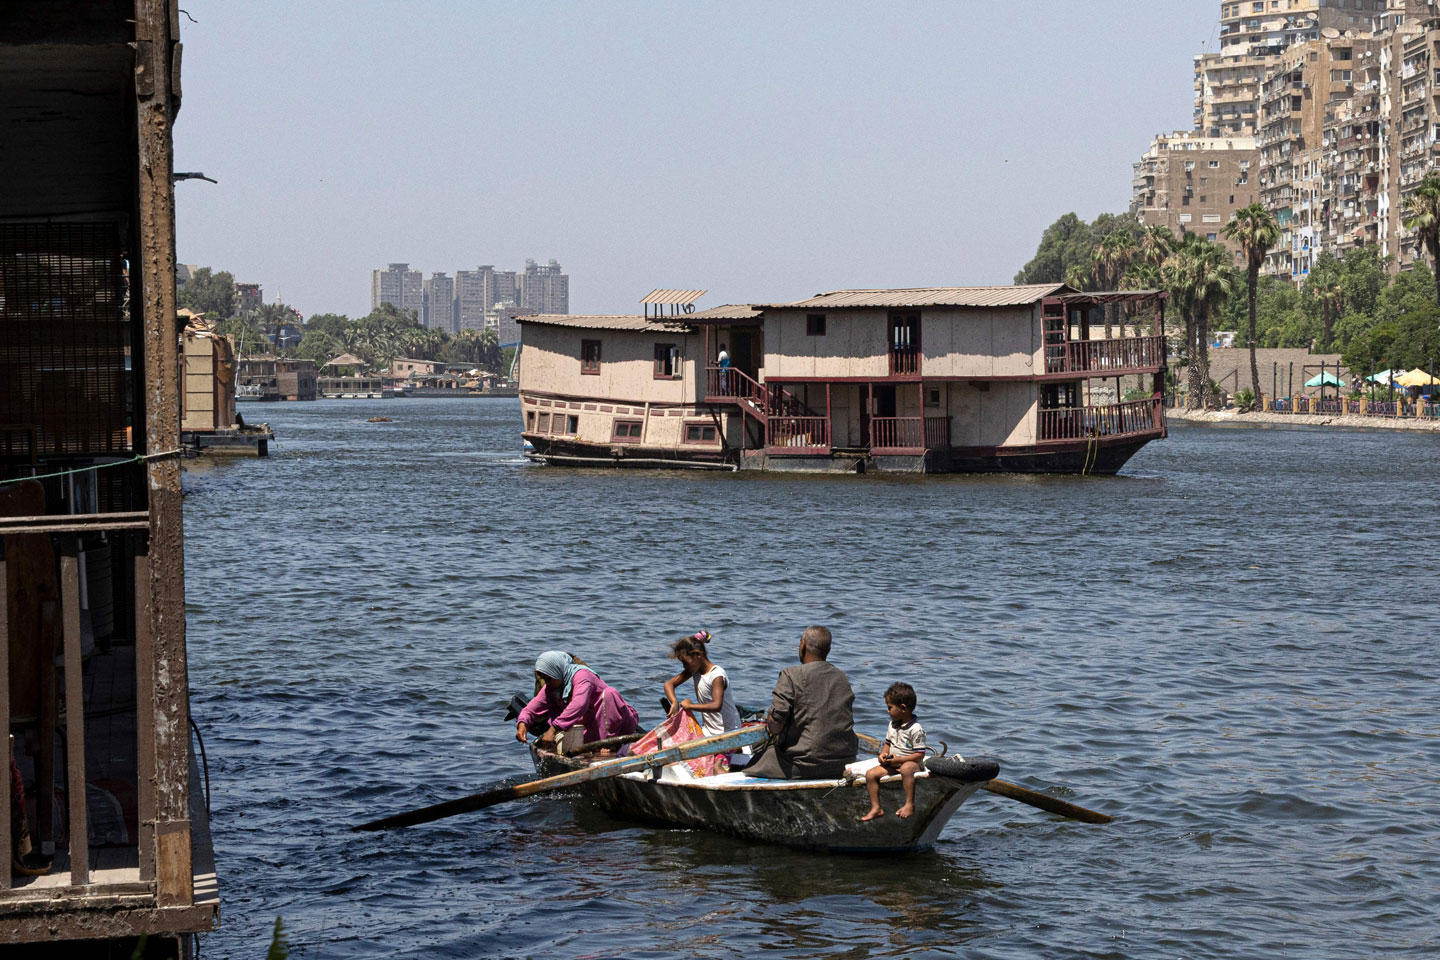 Houseboats on the Nile Once Gave Refuge to German Spies